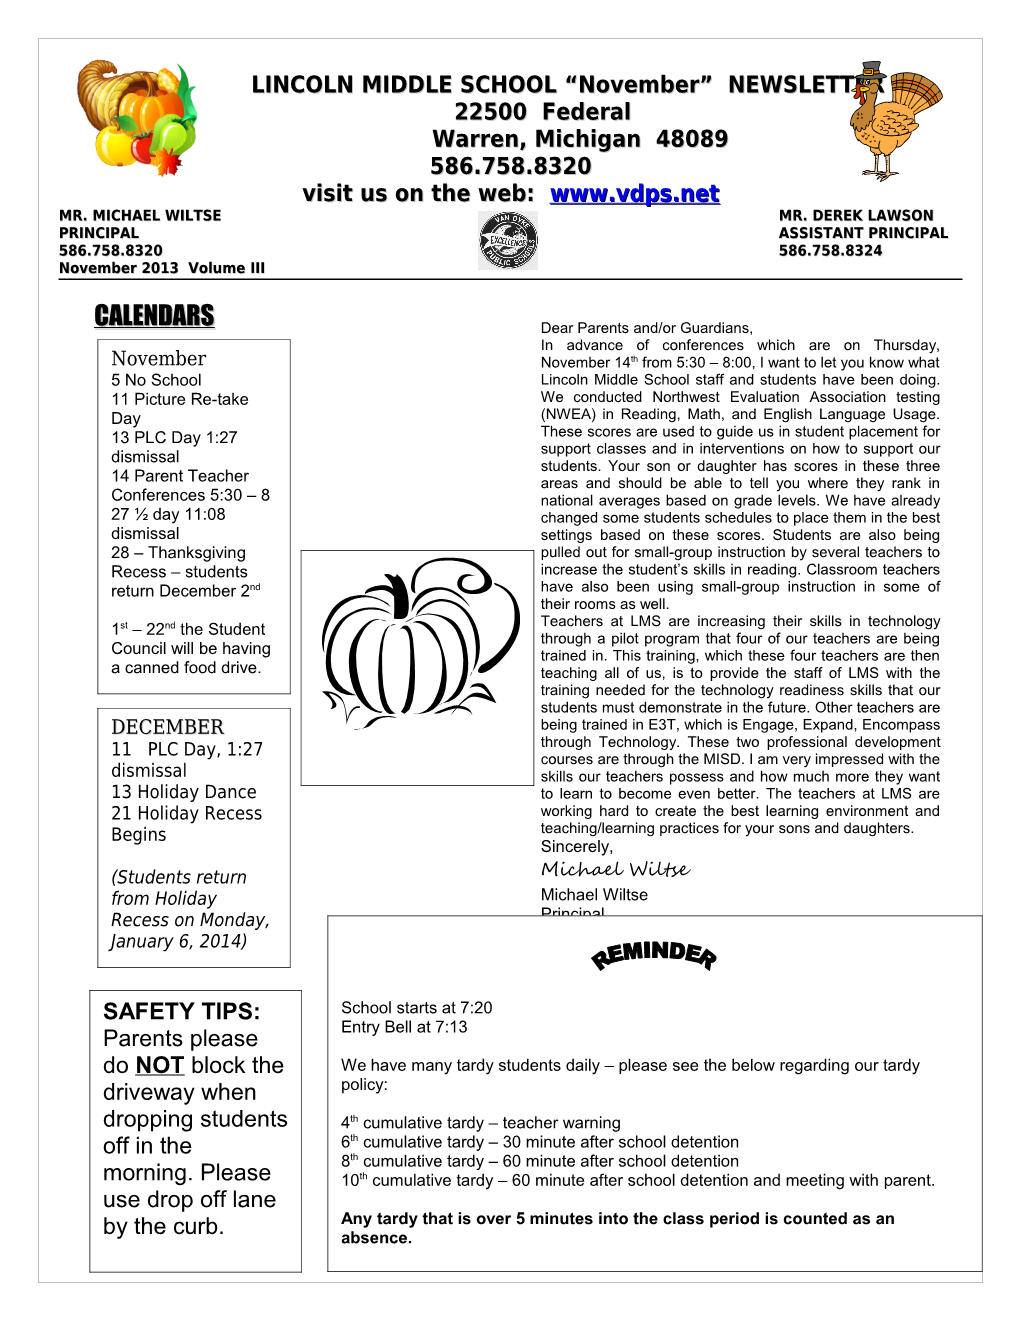 LINCOLN MIDDLE SCHOOL NEWSLETTER Volume 1